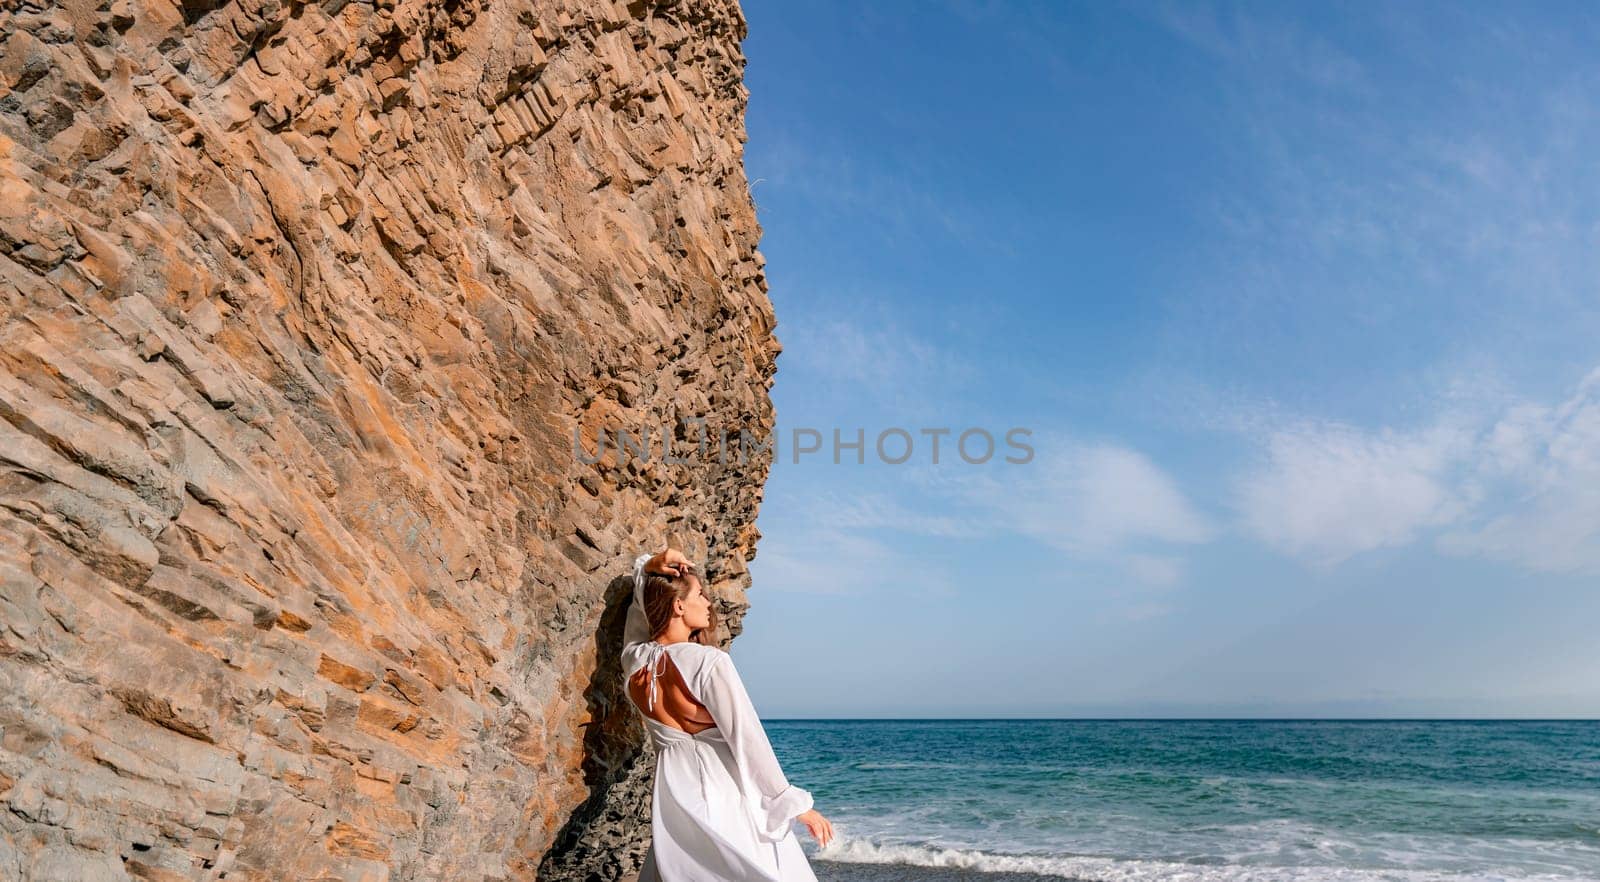 Woman beach white dress flying on Wind. Summer Vacation. A happy woman takes vacation photos to send to friends